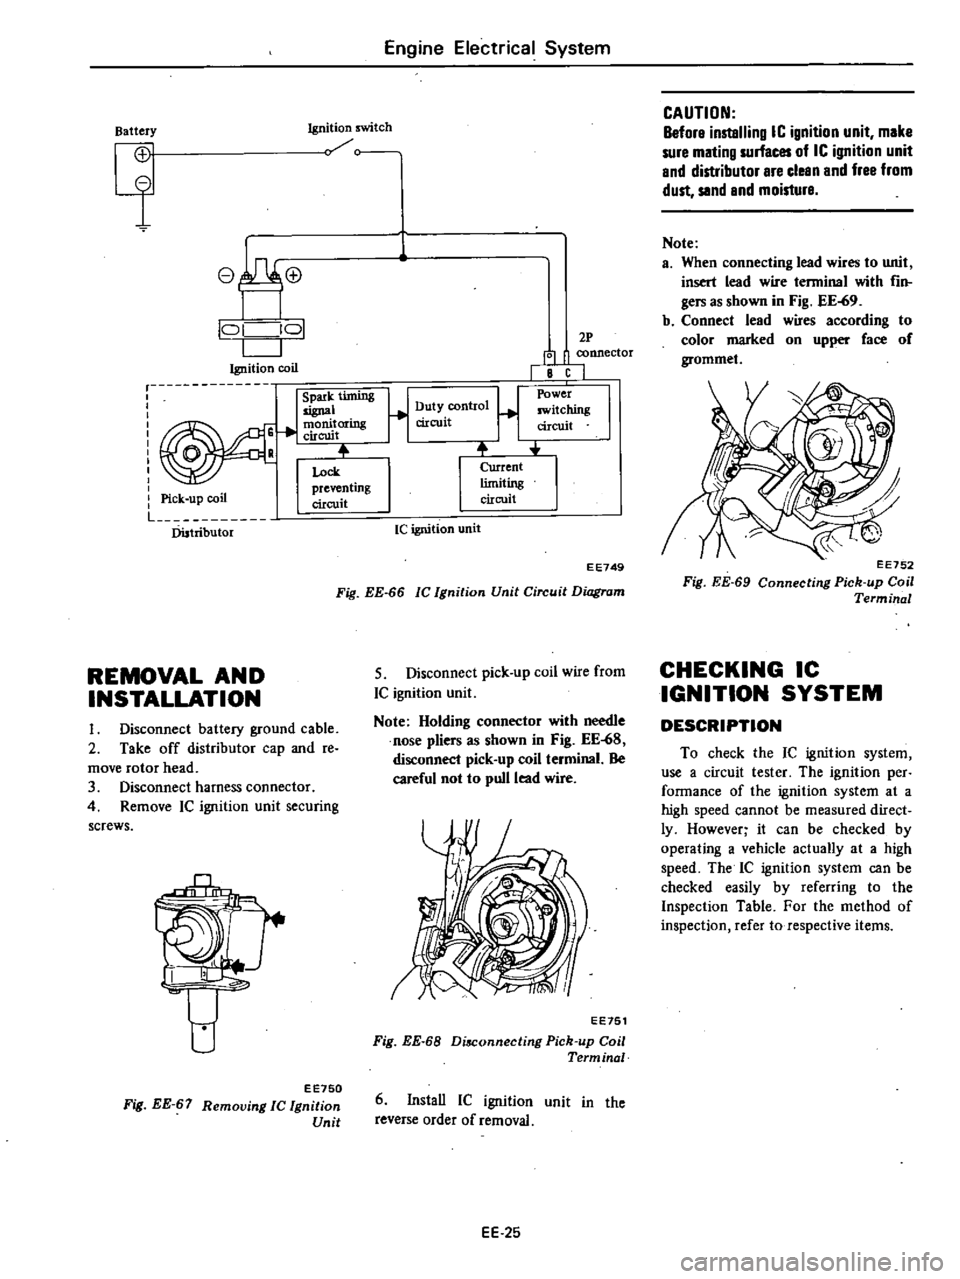 DATSUN 210 1979 User Guide 
Engine 
Electrical

System

Battery 
Ignition 
switch

CG

1

e 
@

P 
L 
JO

L
J

Ignition 
coil

r

Spark 
timing

signal

I

oni
1oring

Clfcwt

0 
R

Lock

Pi 
k 
il 
preventing

c

up 
co

circu